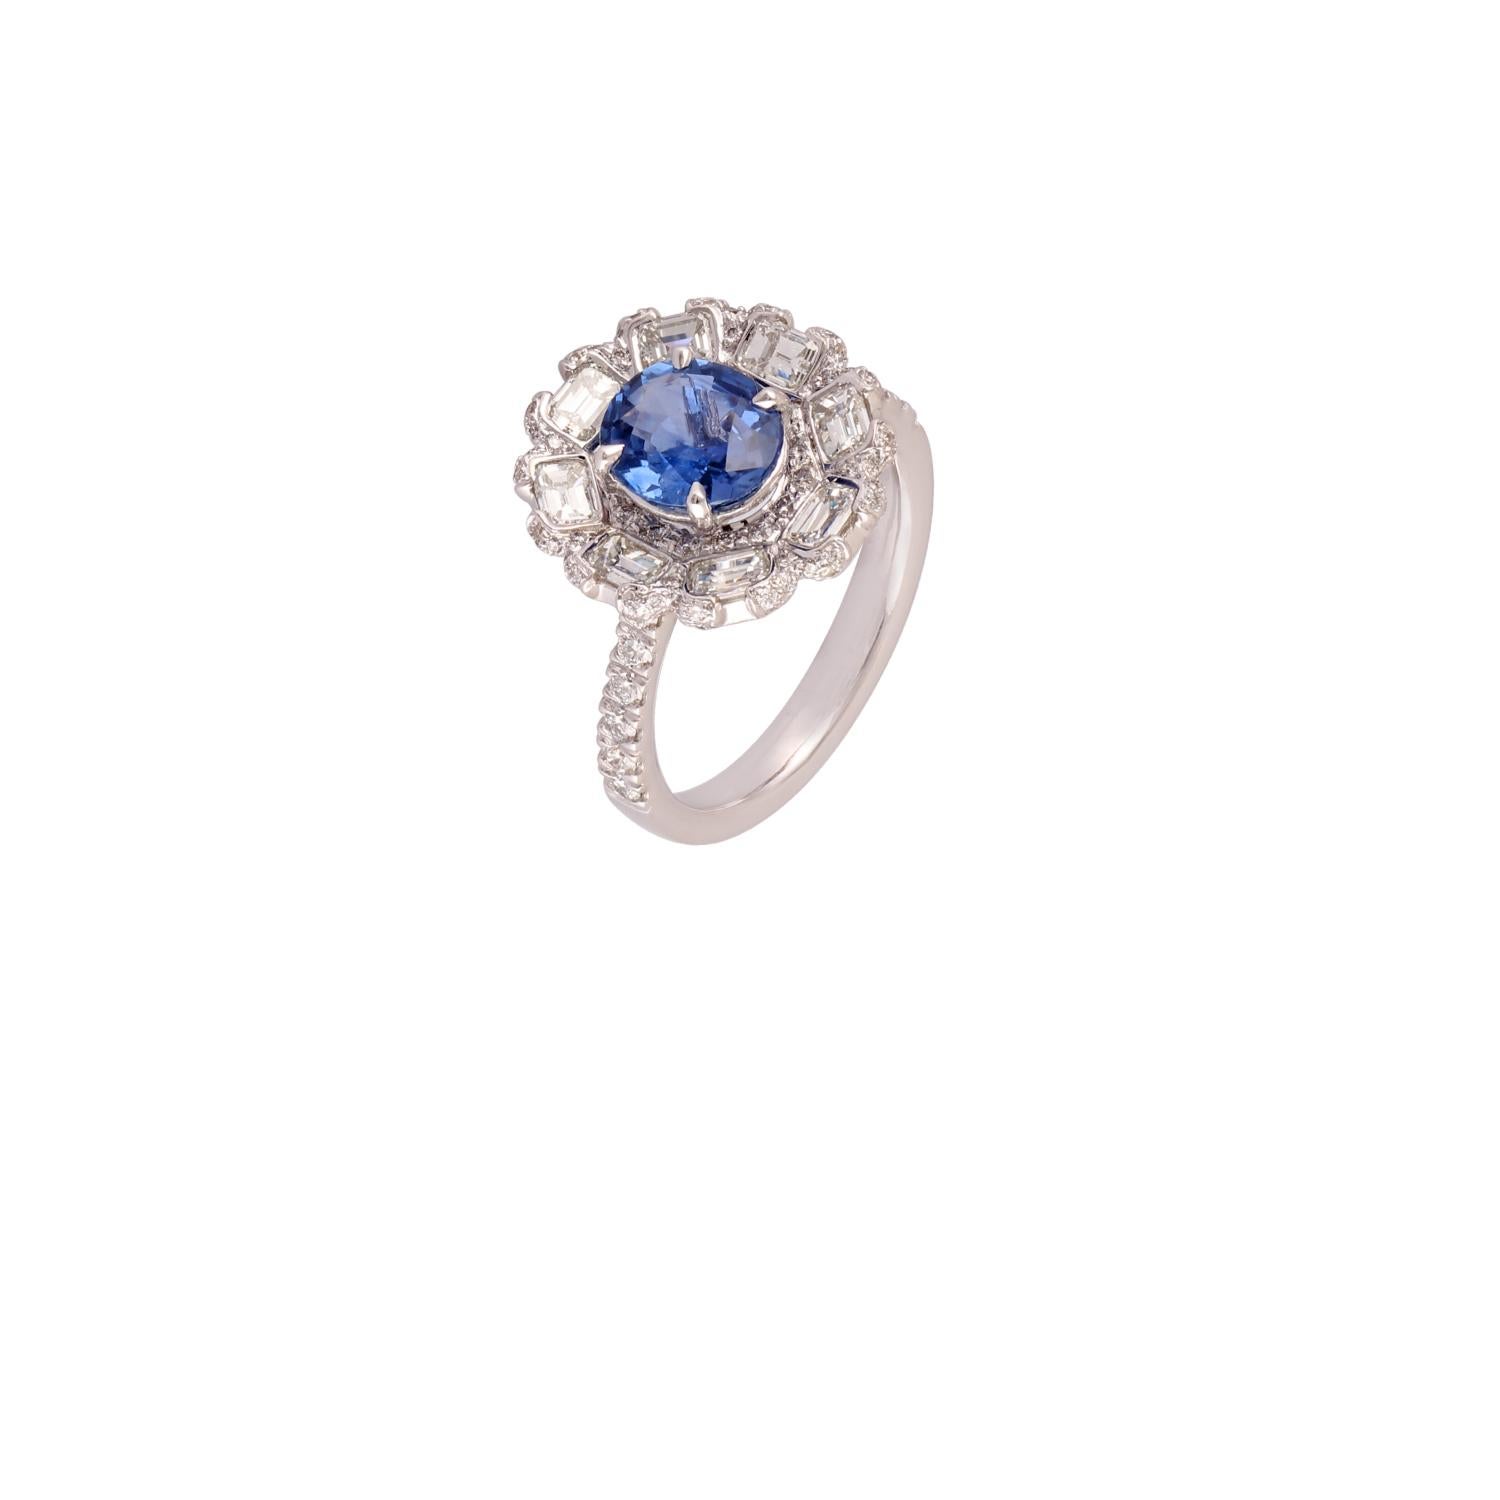 Contemporary 1.83 Carat Blue Sapphire and Diamond Ring in 18 Karat White Gold For Sale